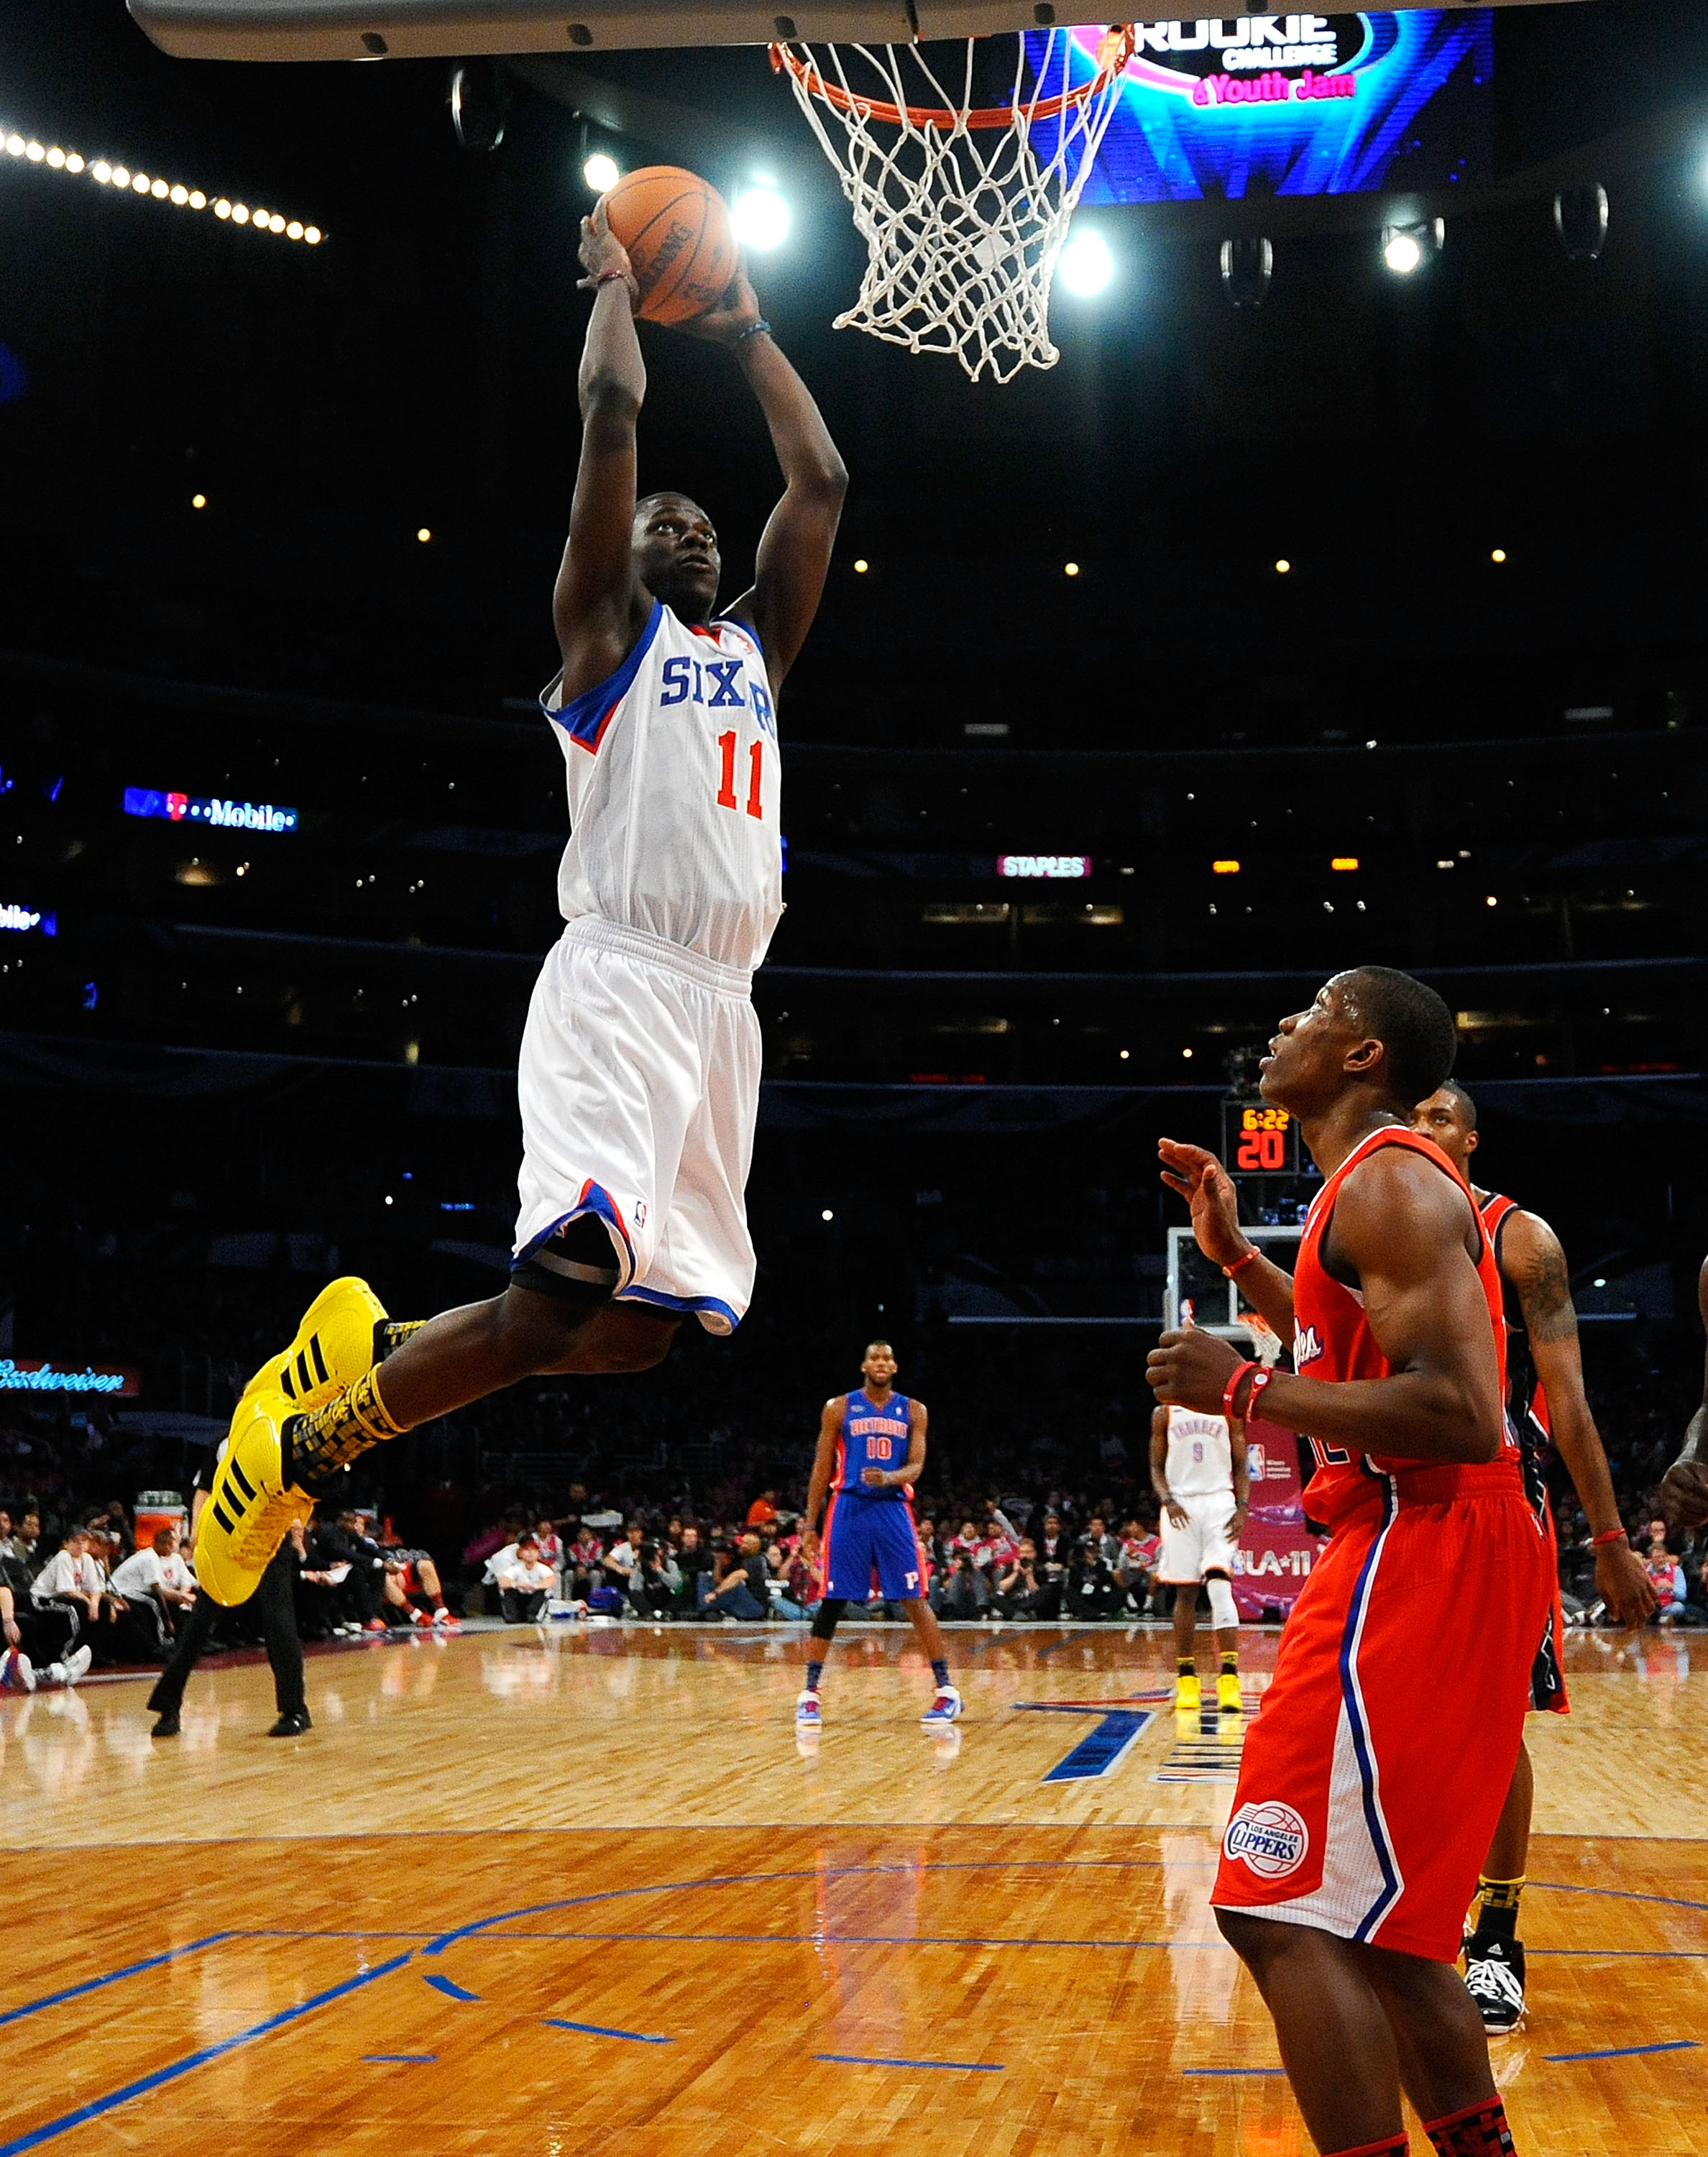 LOS ANGELES, CA - FEBRUARY 18:  Jrue Holiday #11 of the Philadelphia 76ers and the Sophomore Team dunks the ball in the first half against the Rookie Team during the T-Mobile Rookie Challenge and Youth Jam at Staples Center on February 18, 2011 in Los Ang